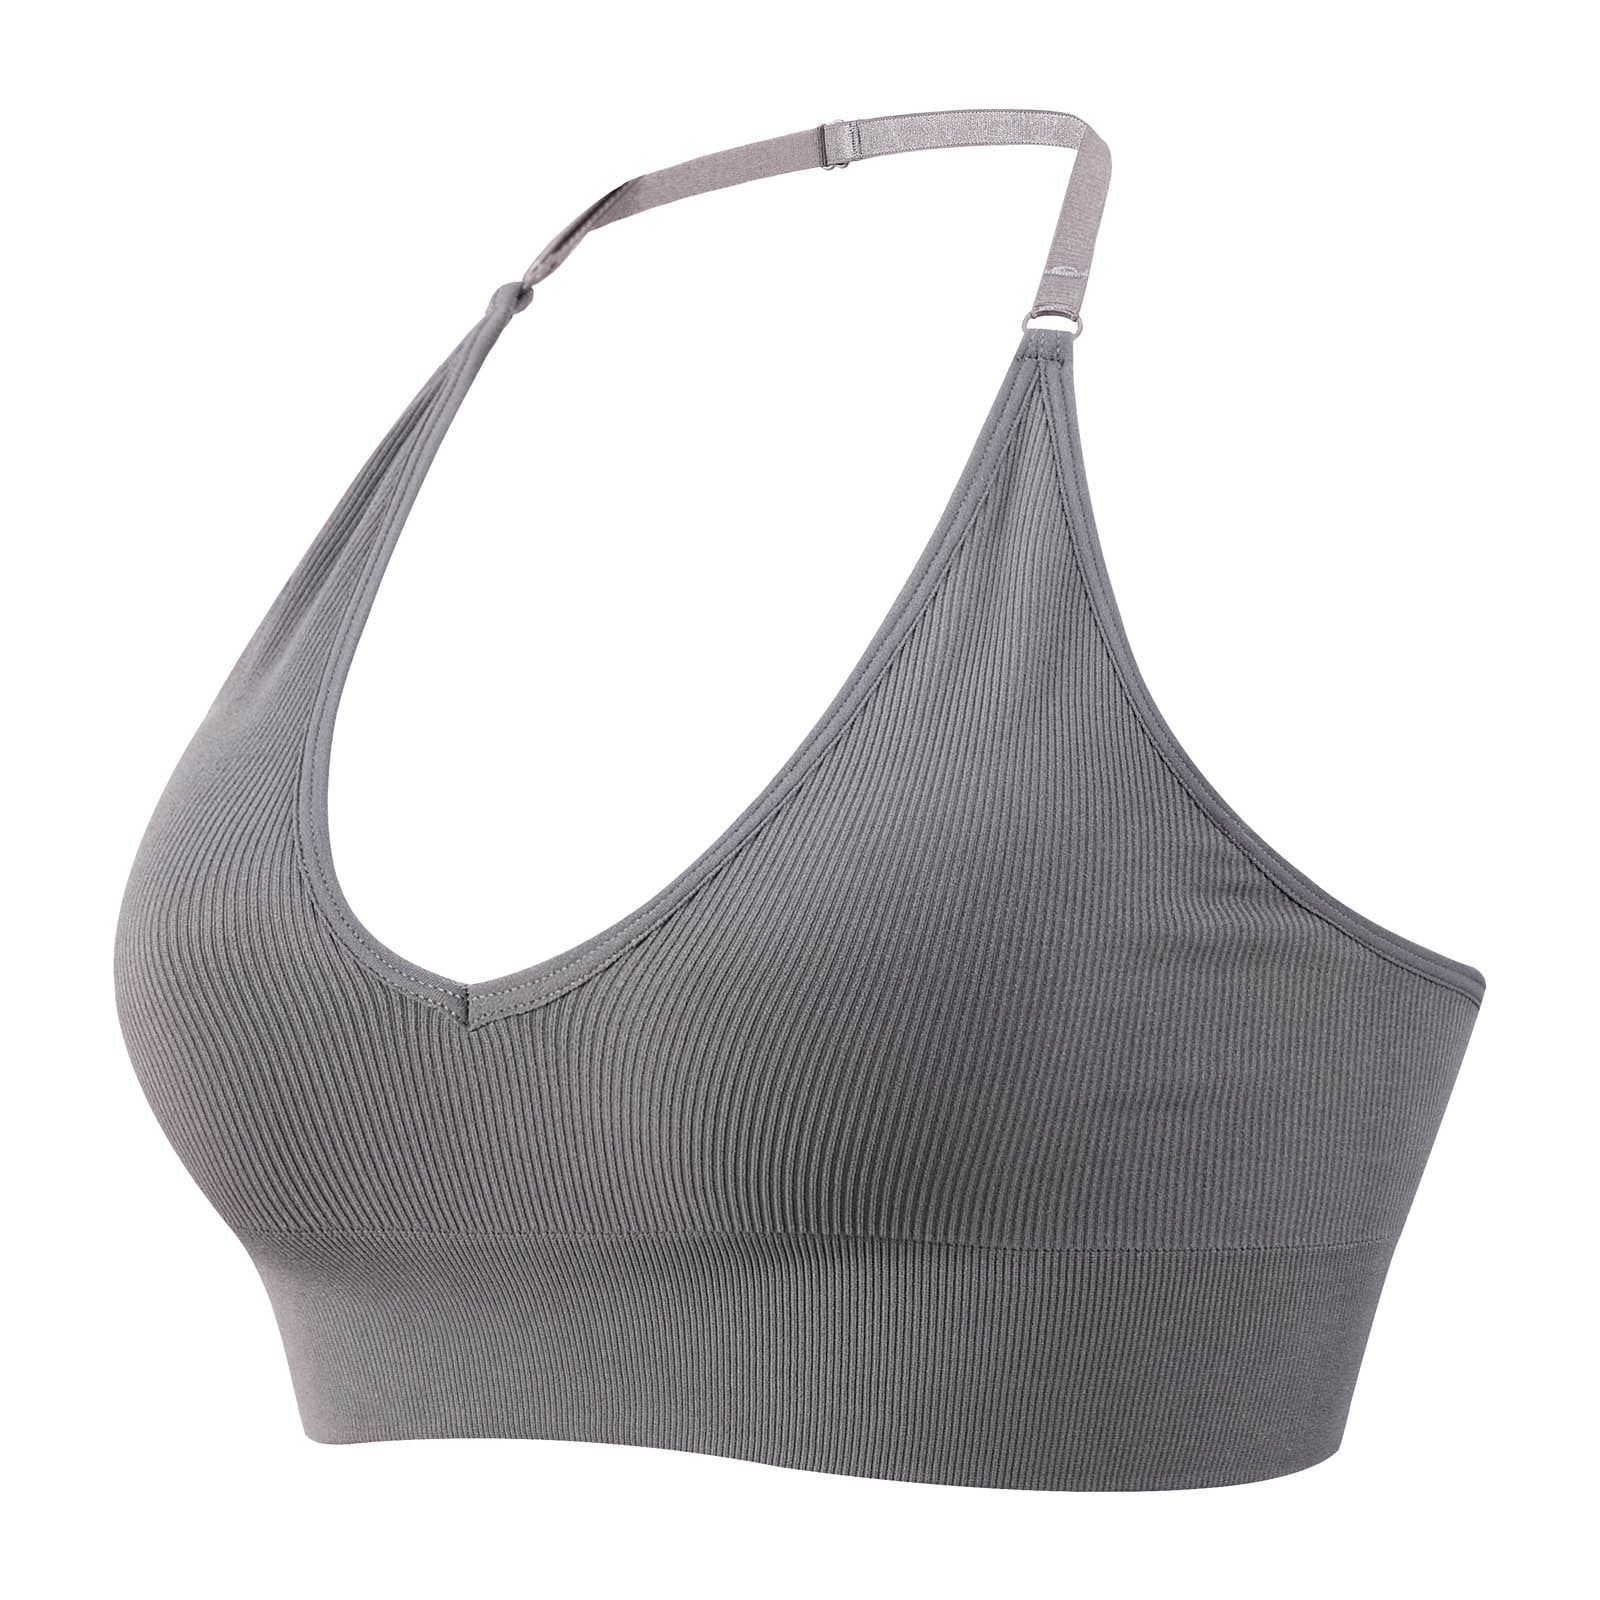  Moon Seamless Halter Backless Sport Bra For Women Adjustable  Padded Active Workout Gym Yoga Crop Tank Top Smoky Grey